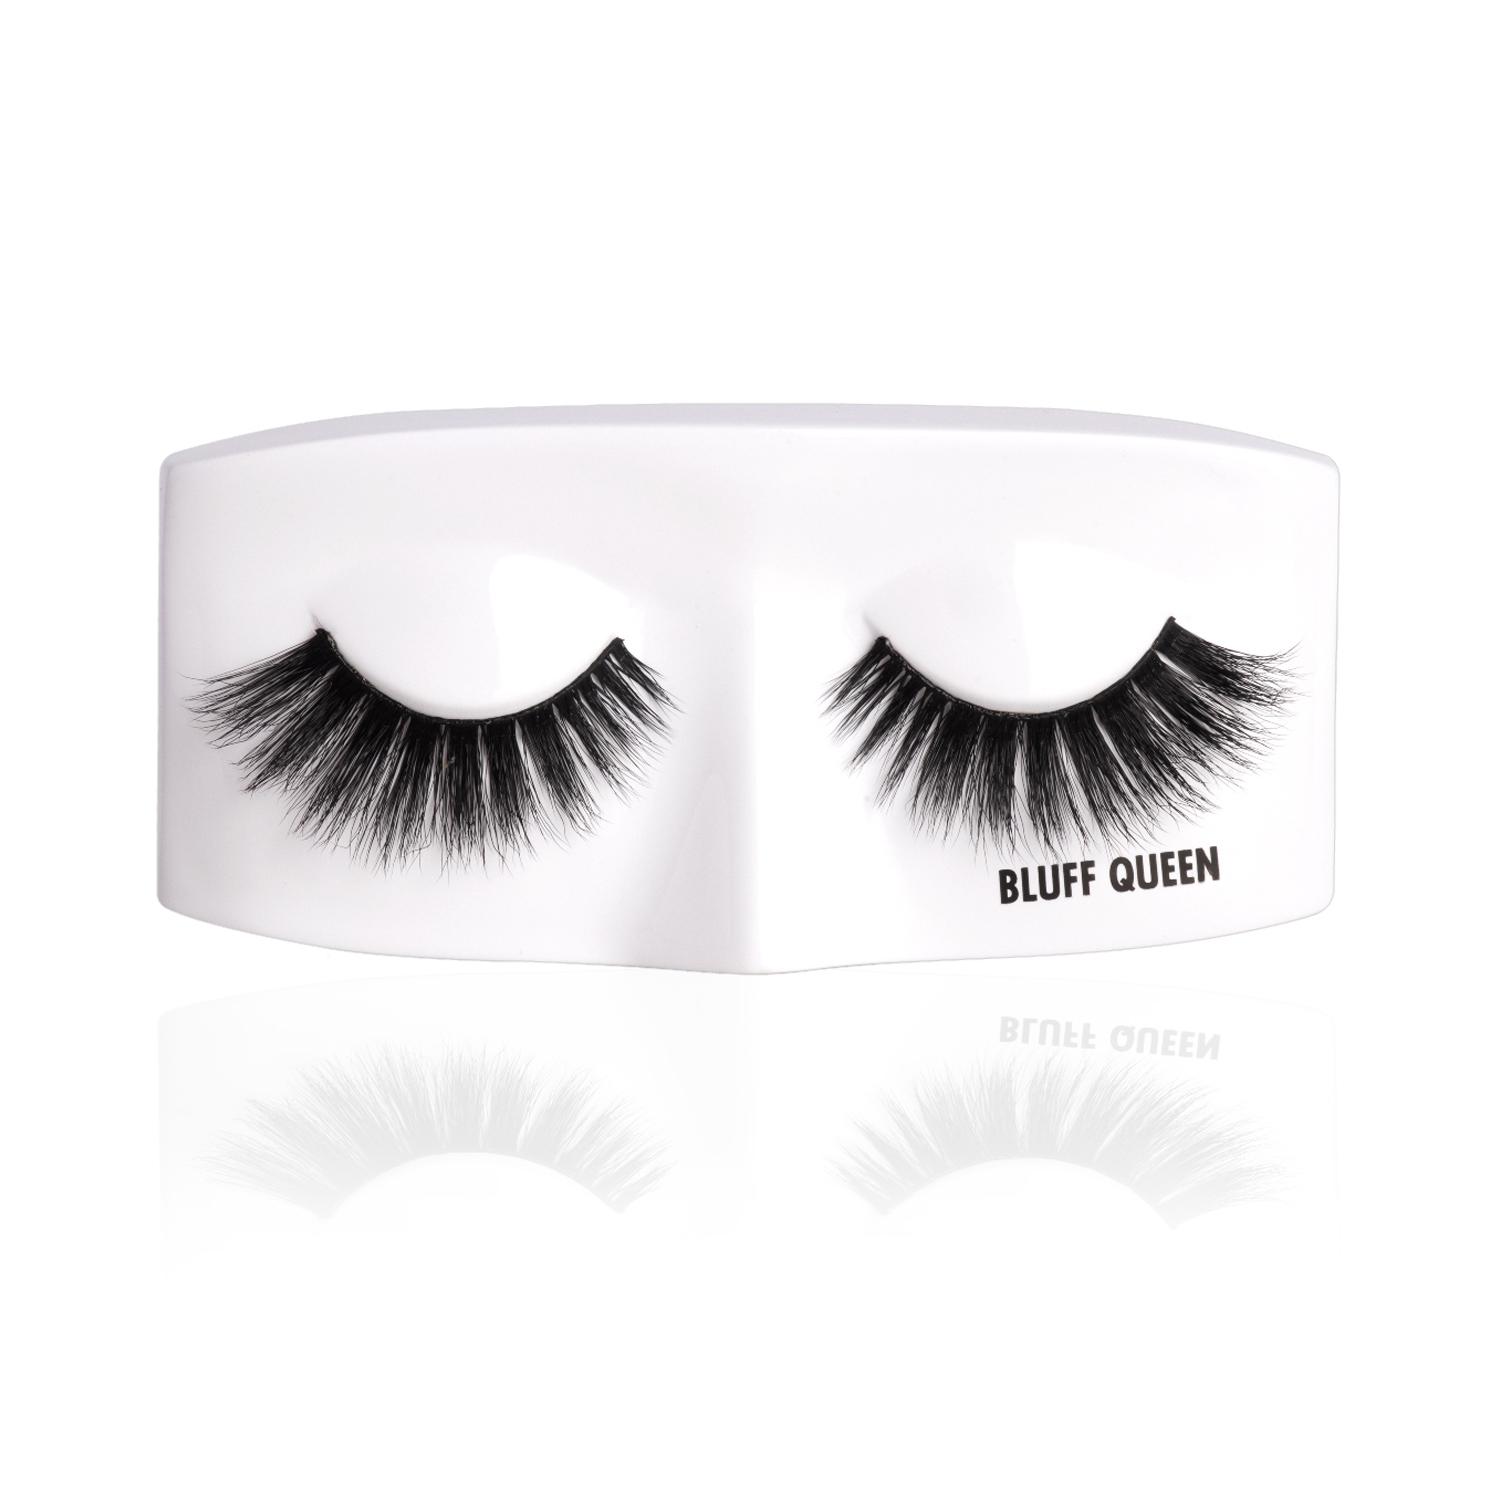 PAC | PAC Ace Of Lashes - Bluff Queen (1 Pair)